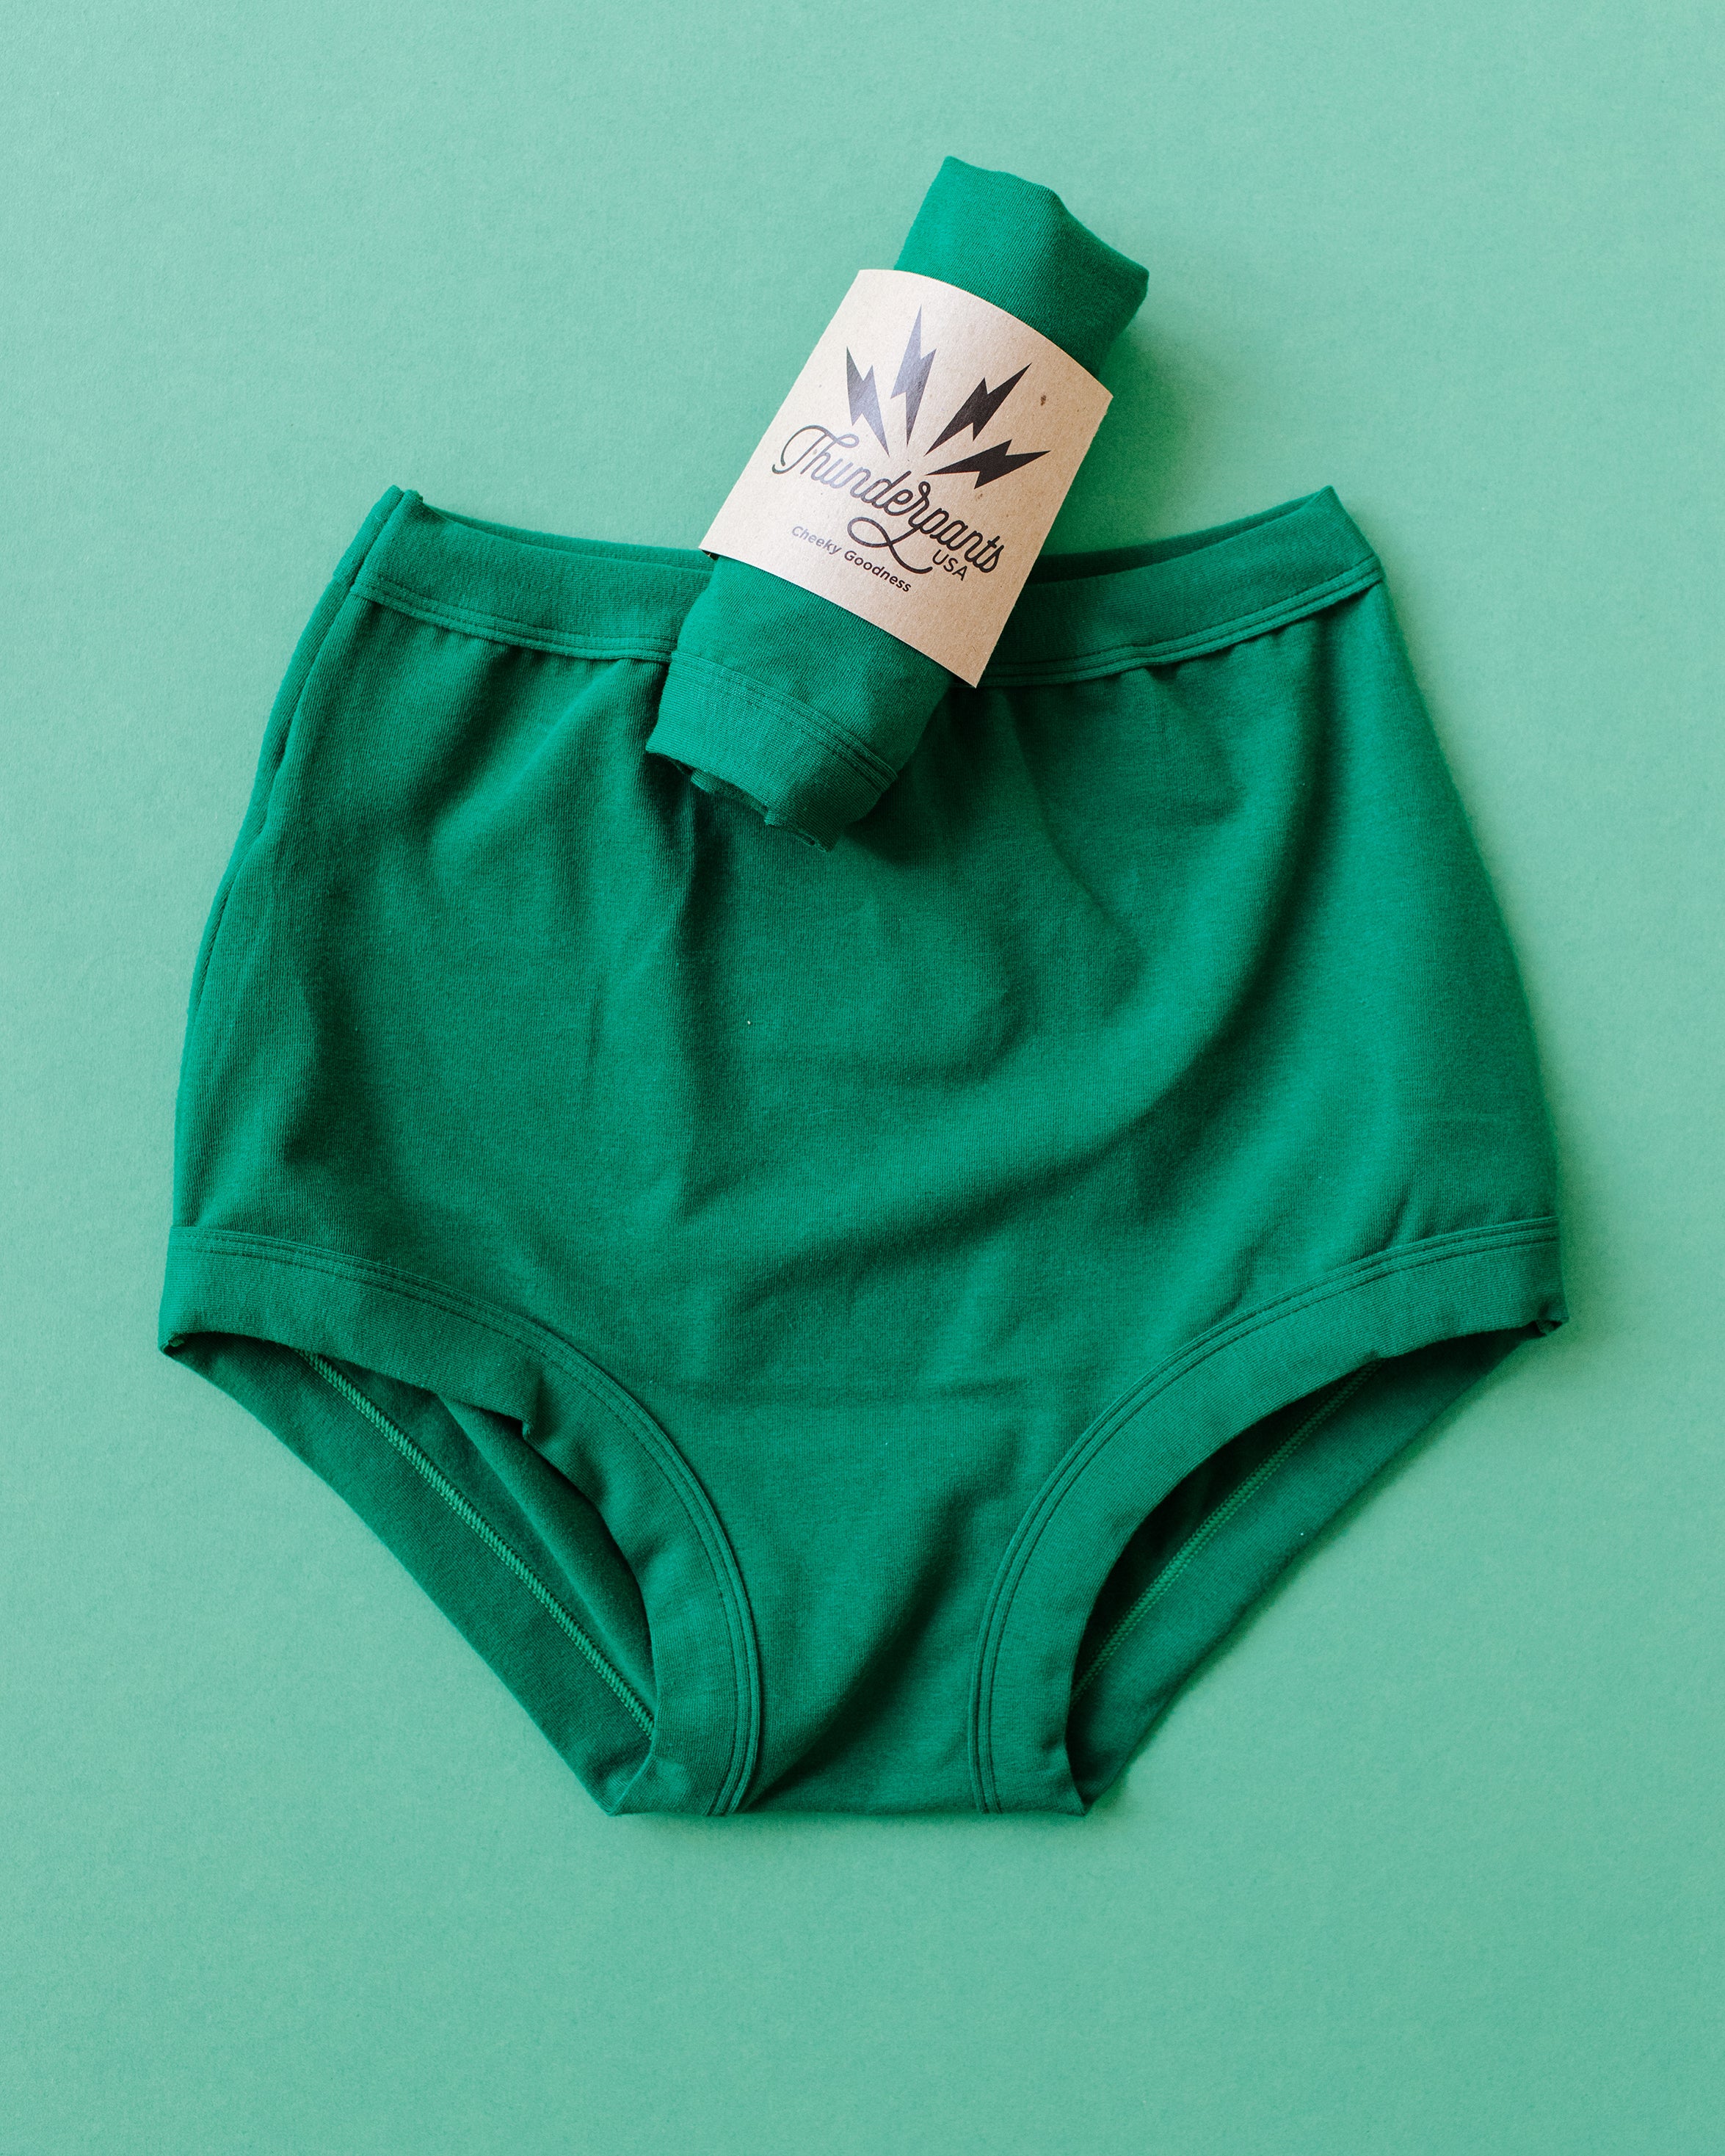 Flat lay of Thunderpants Sky Rise style underwear and a packaged pair in Emerald Green.